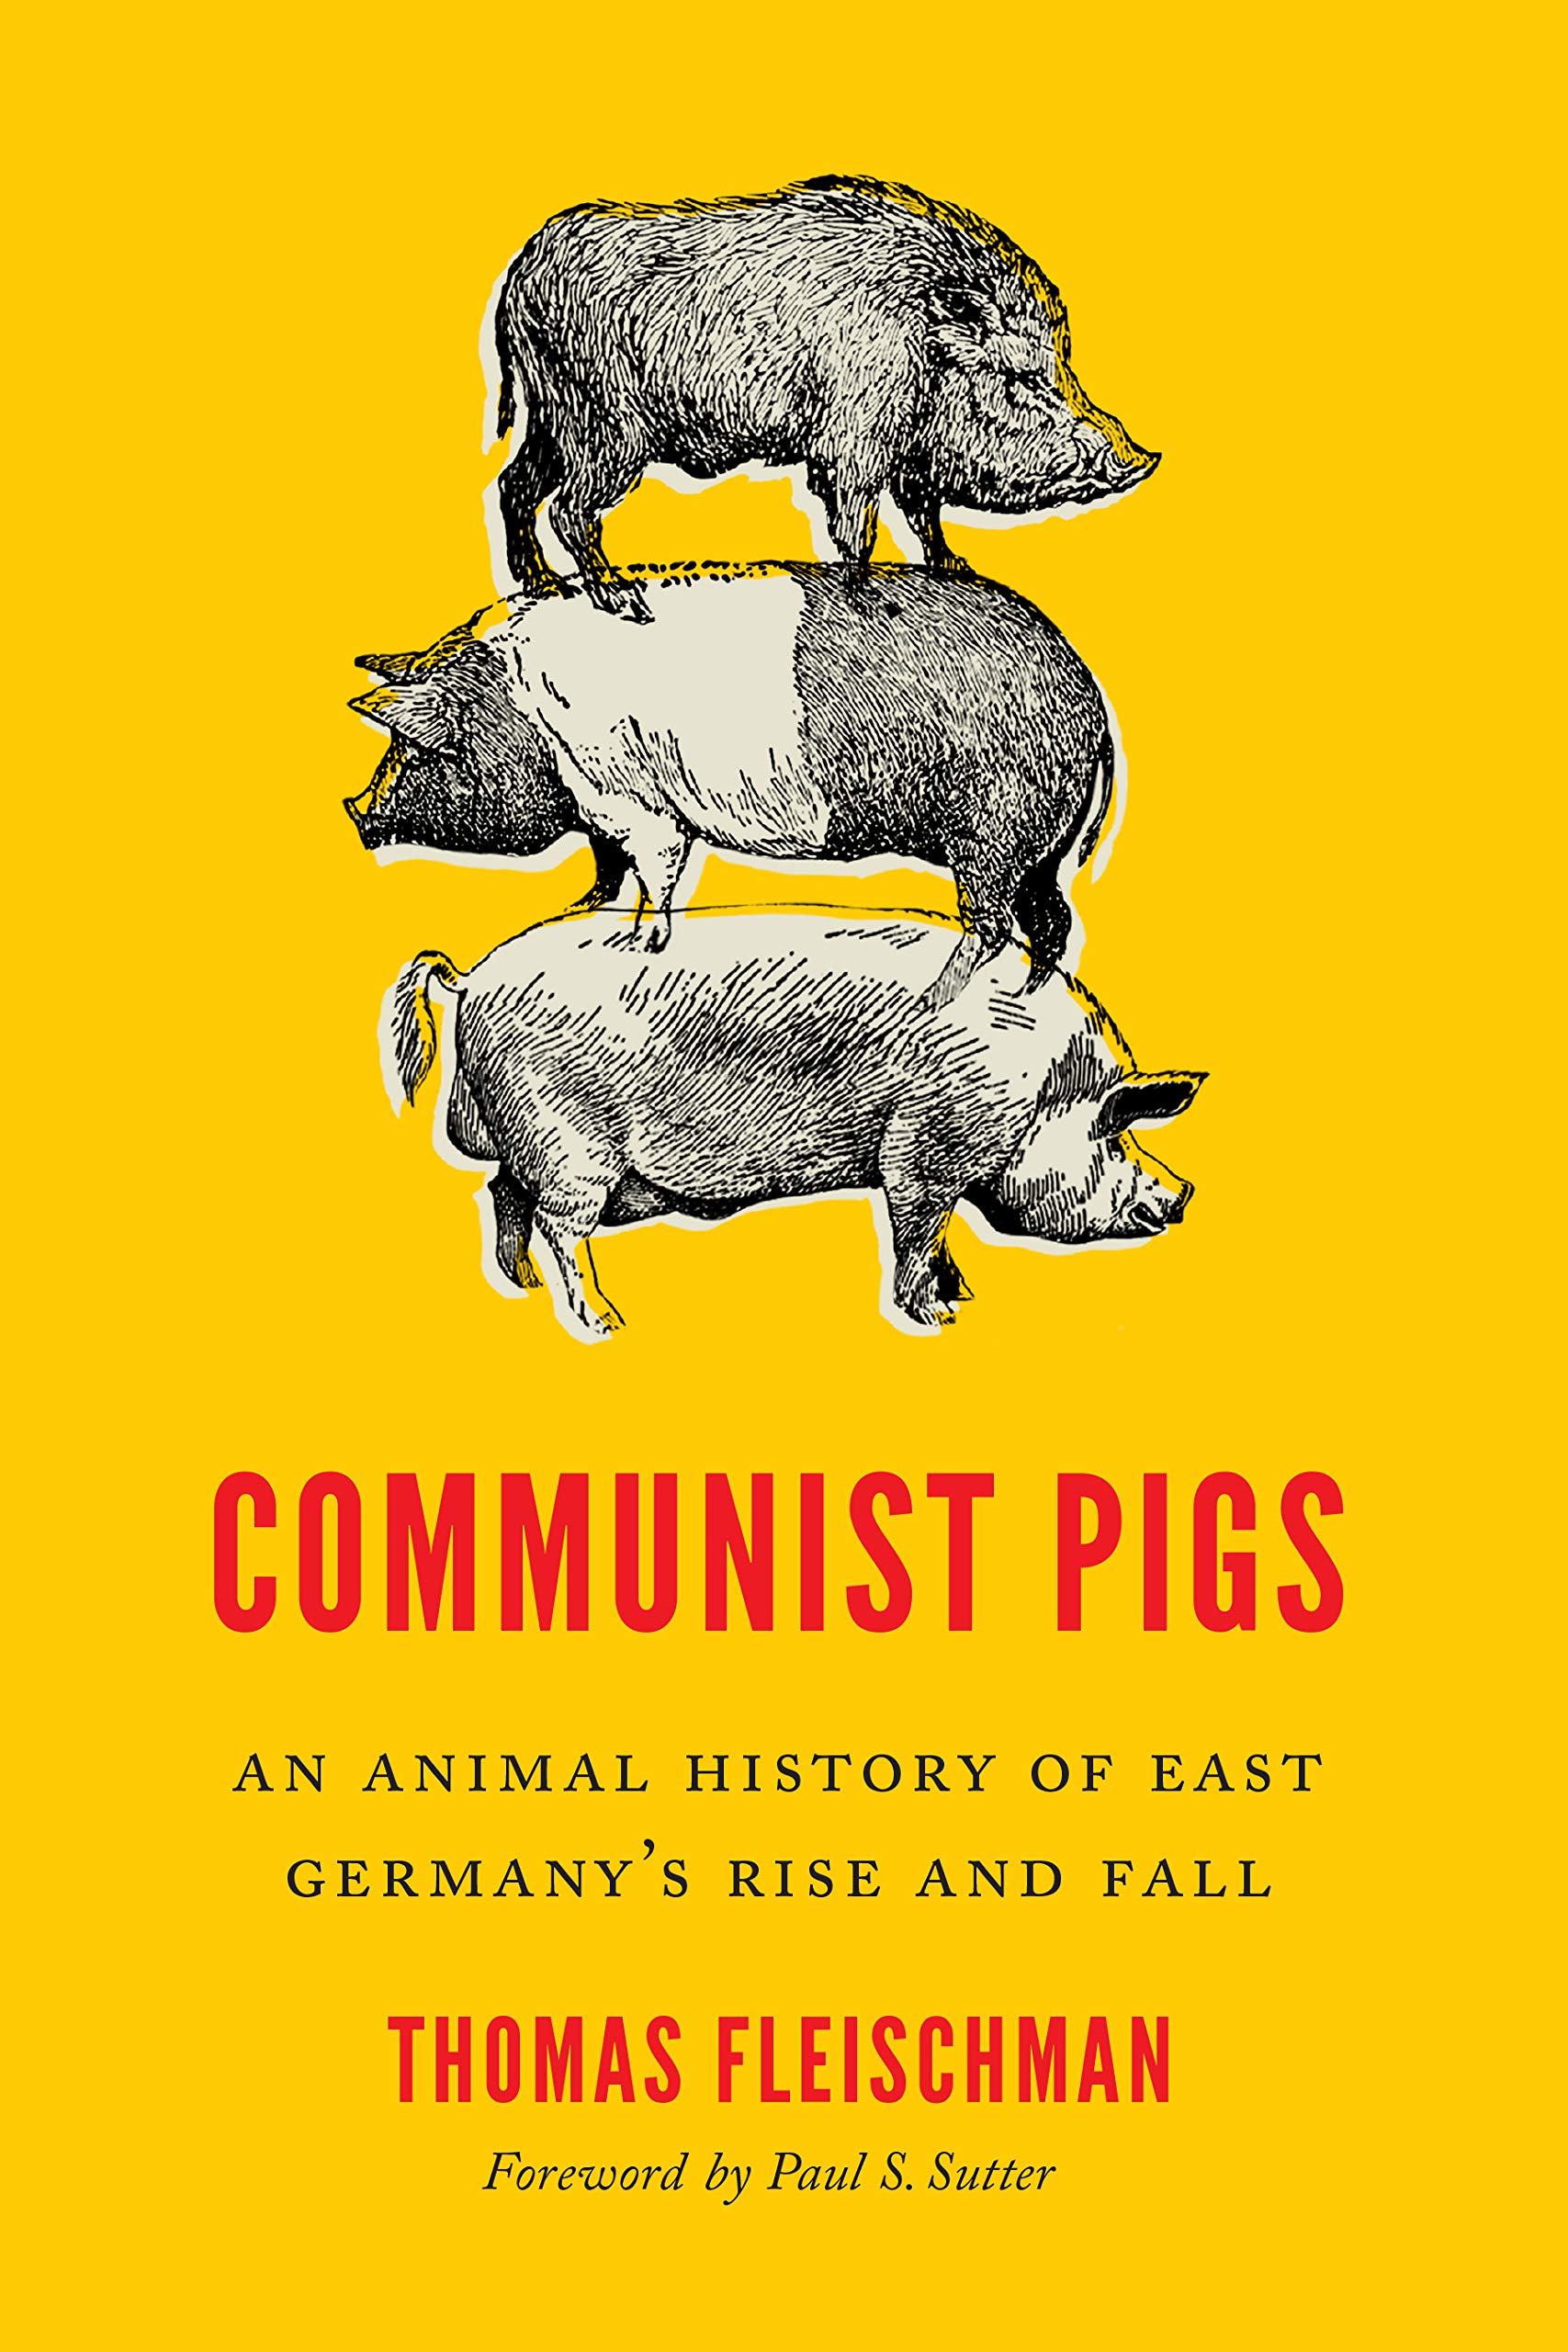 Cover image of •	Fleischman, Thomas. Communist Pigs. An Animal History of East Germany’s Rise and Fall. 